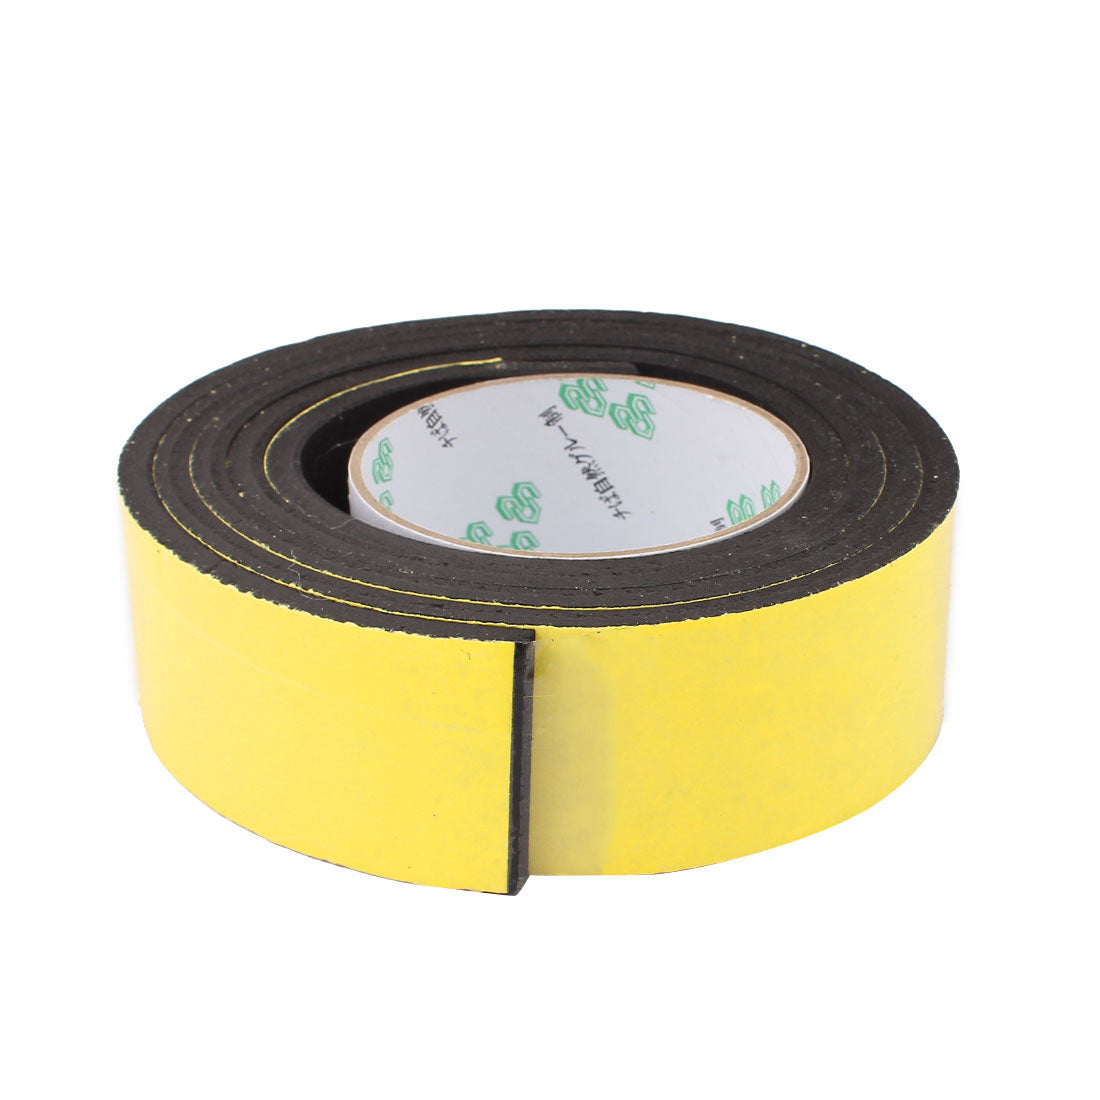 uxcell Uxcell 45mm x 6mm Single Sided Self Adhesive Shockproof Sponge Foam Tape 2M Length